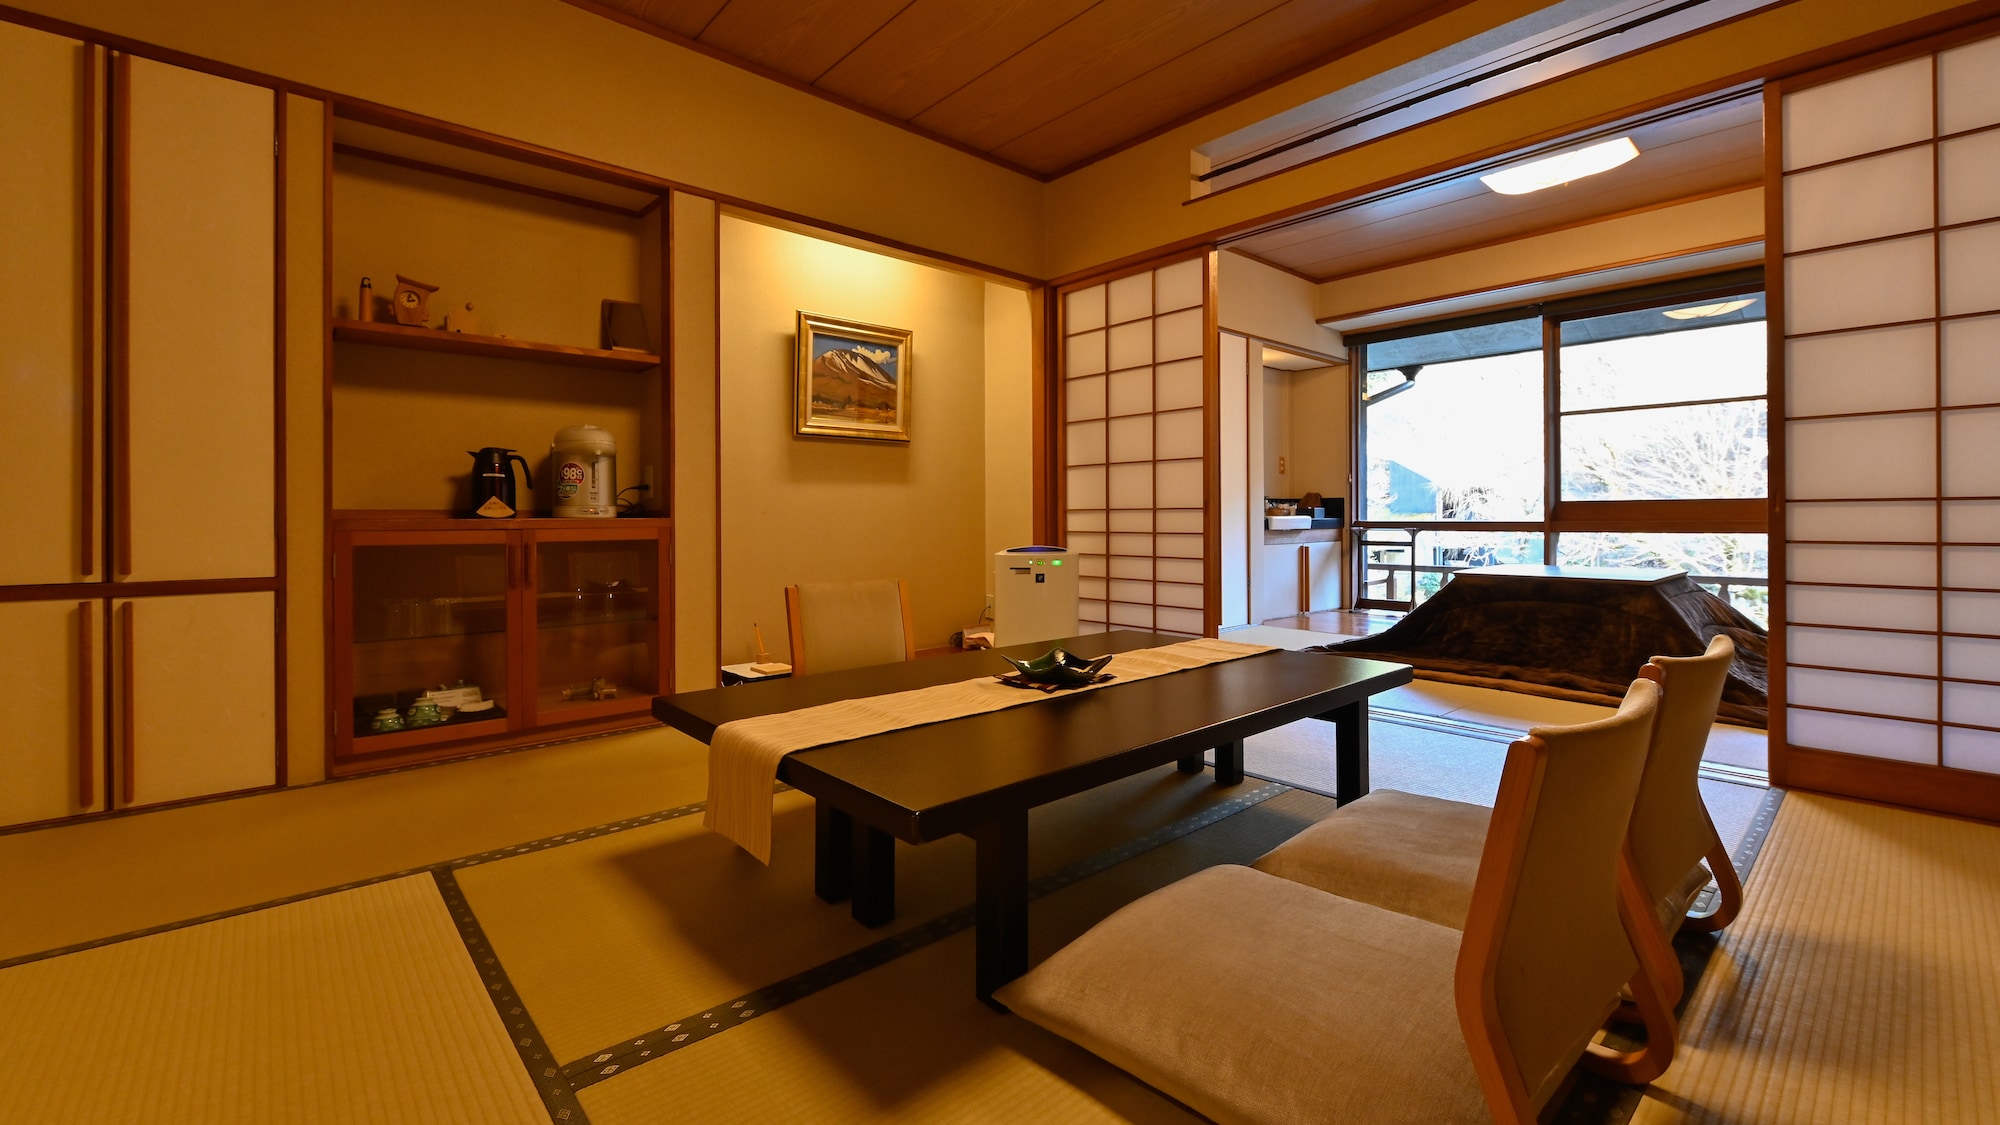 [An example of Seifukan Japanese-style room] The warmth of wood and the retro taste are popular rooms.